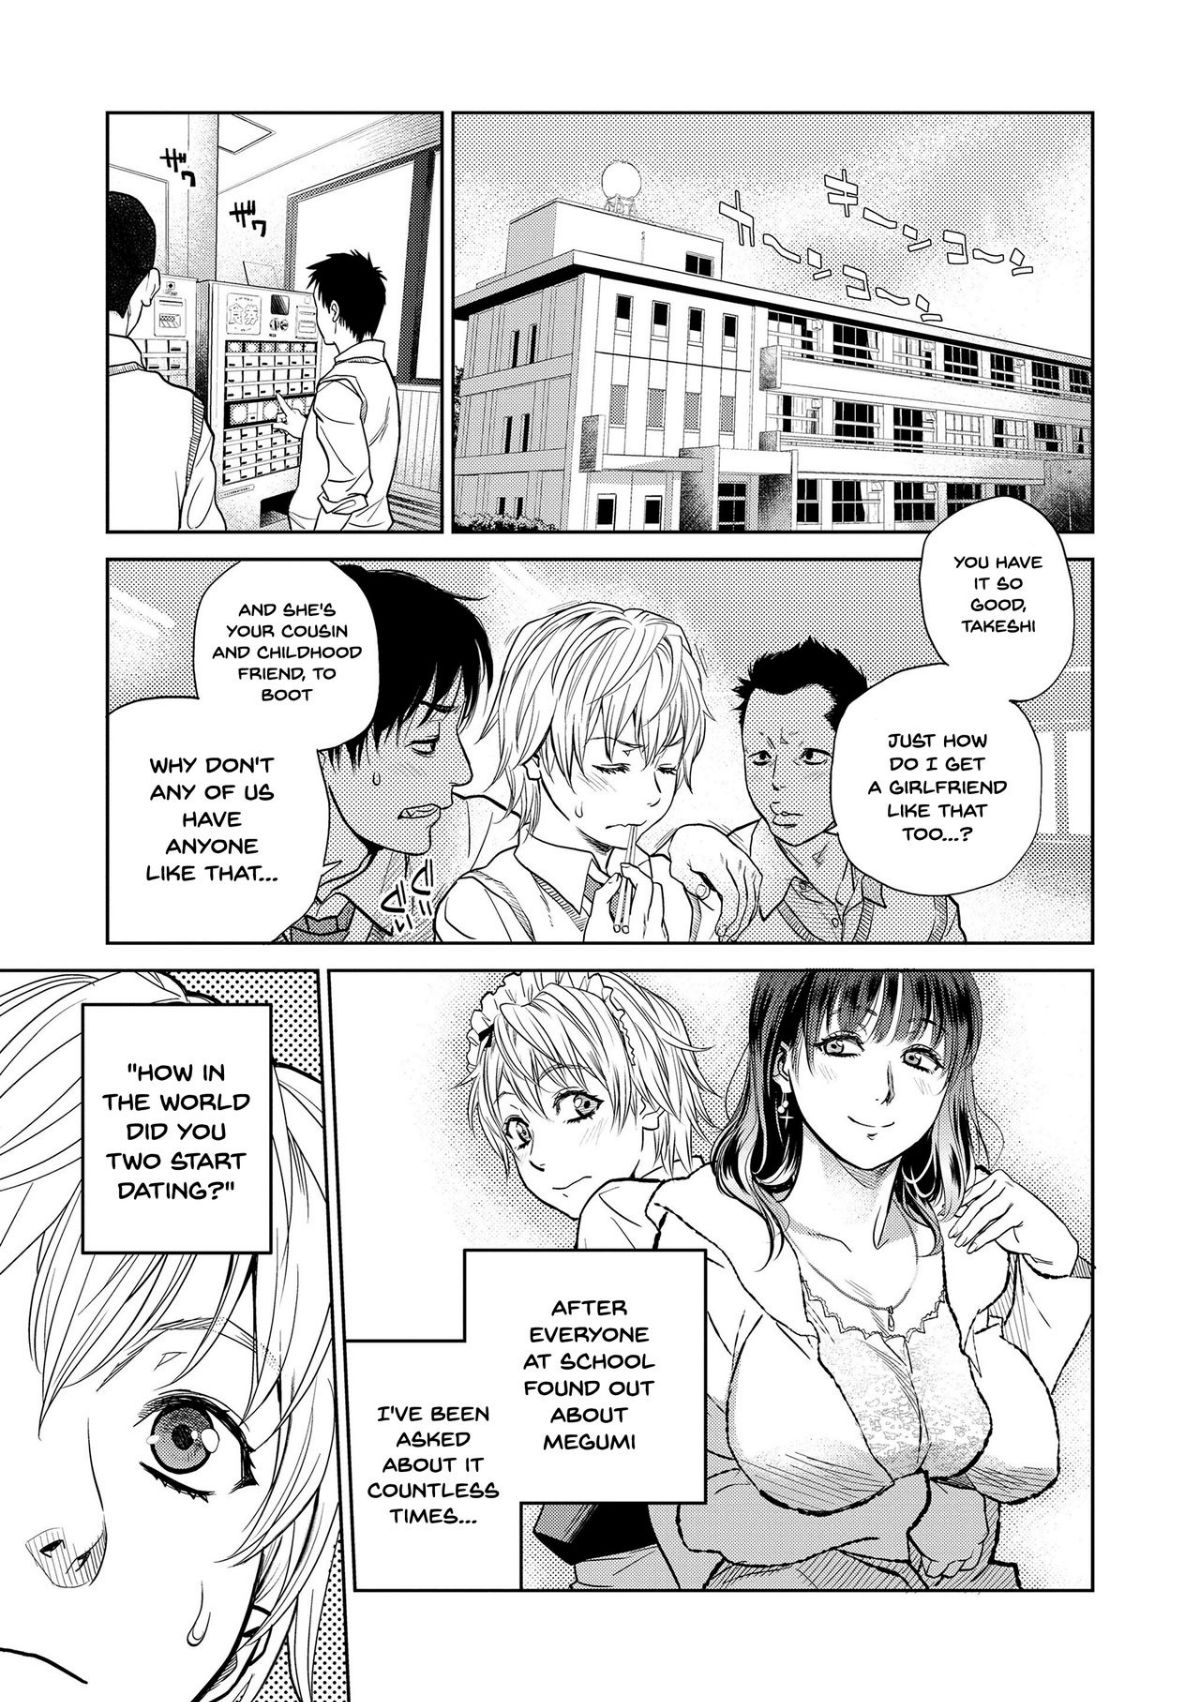 Together With My Older Cousin part 4 Hentai english 29